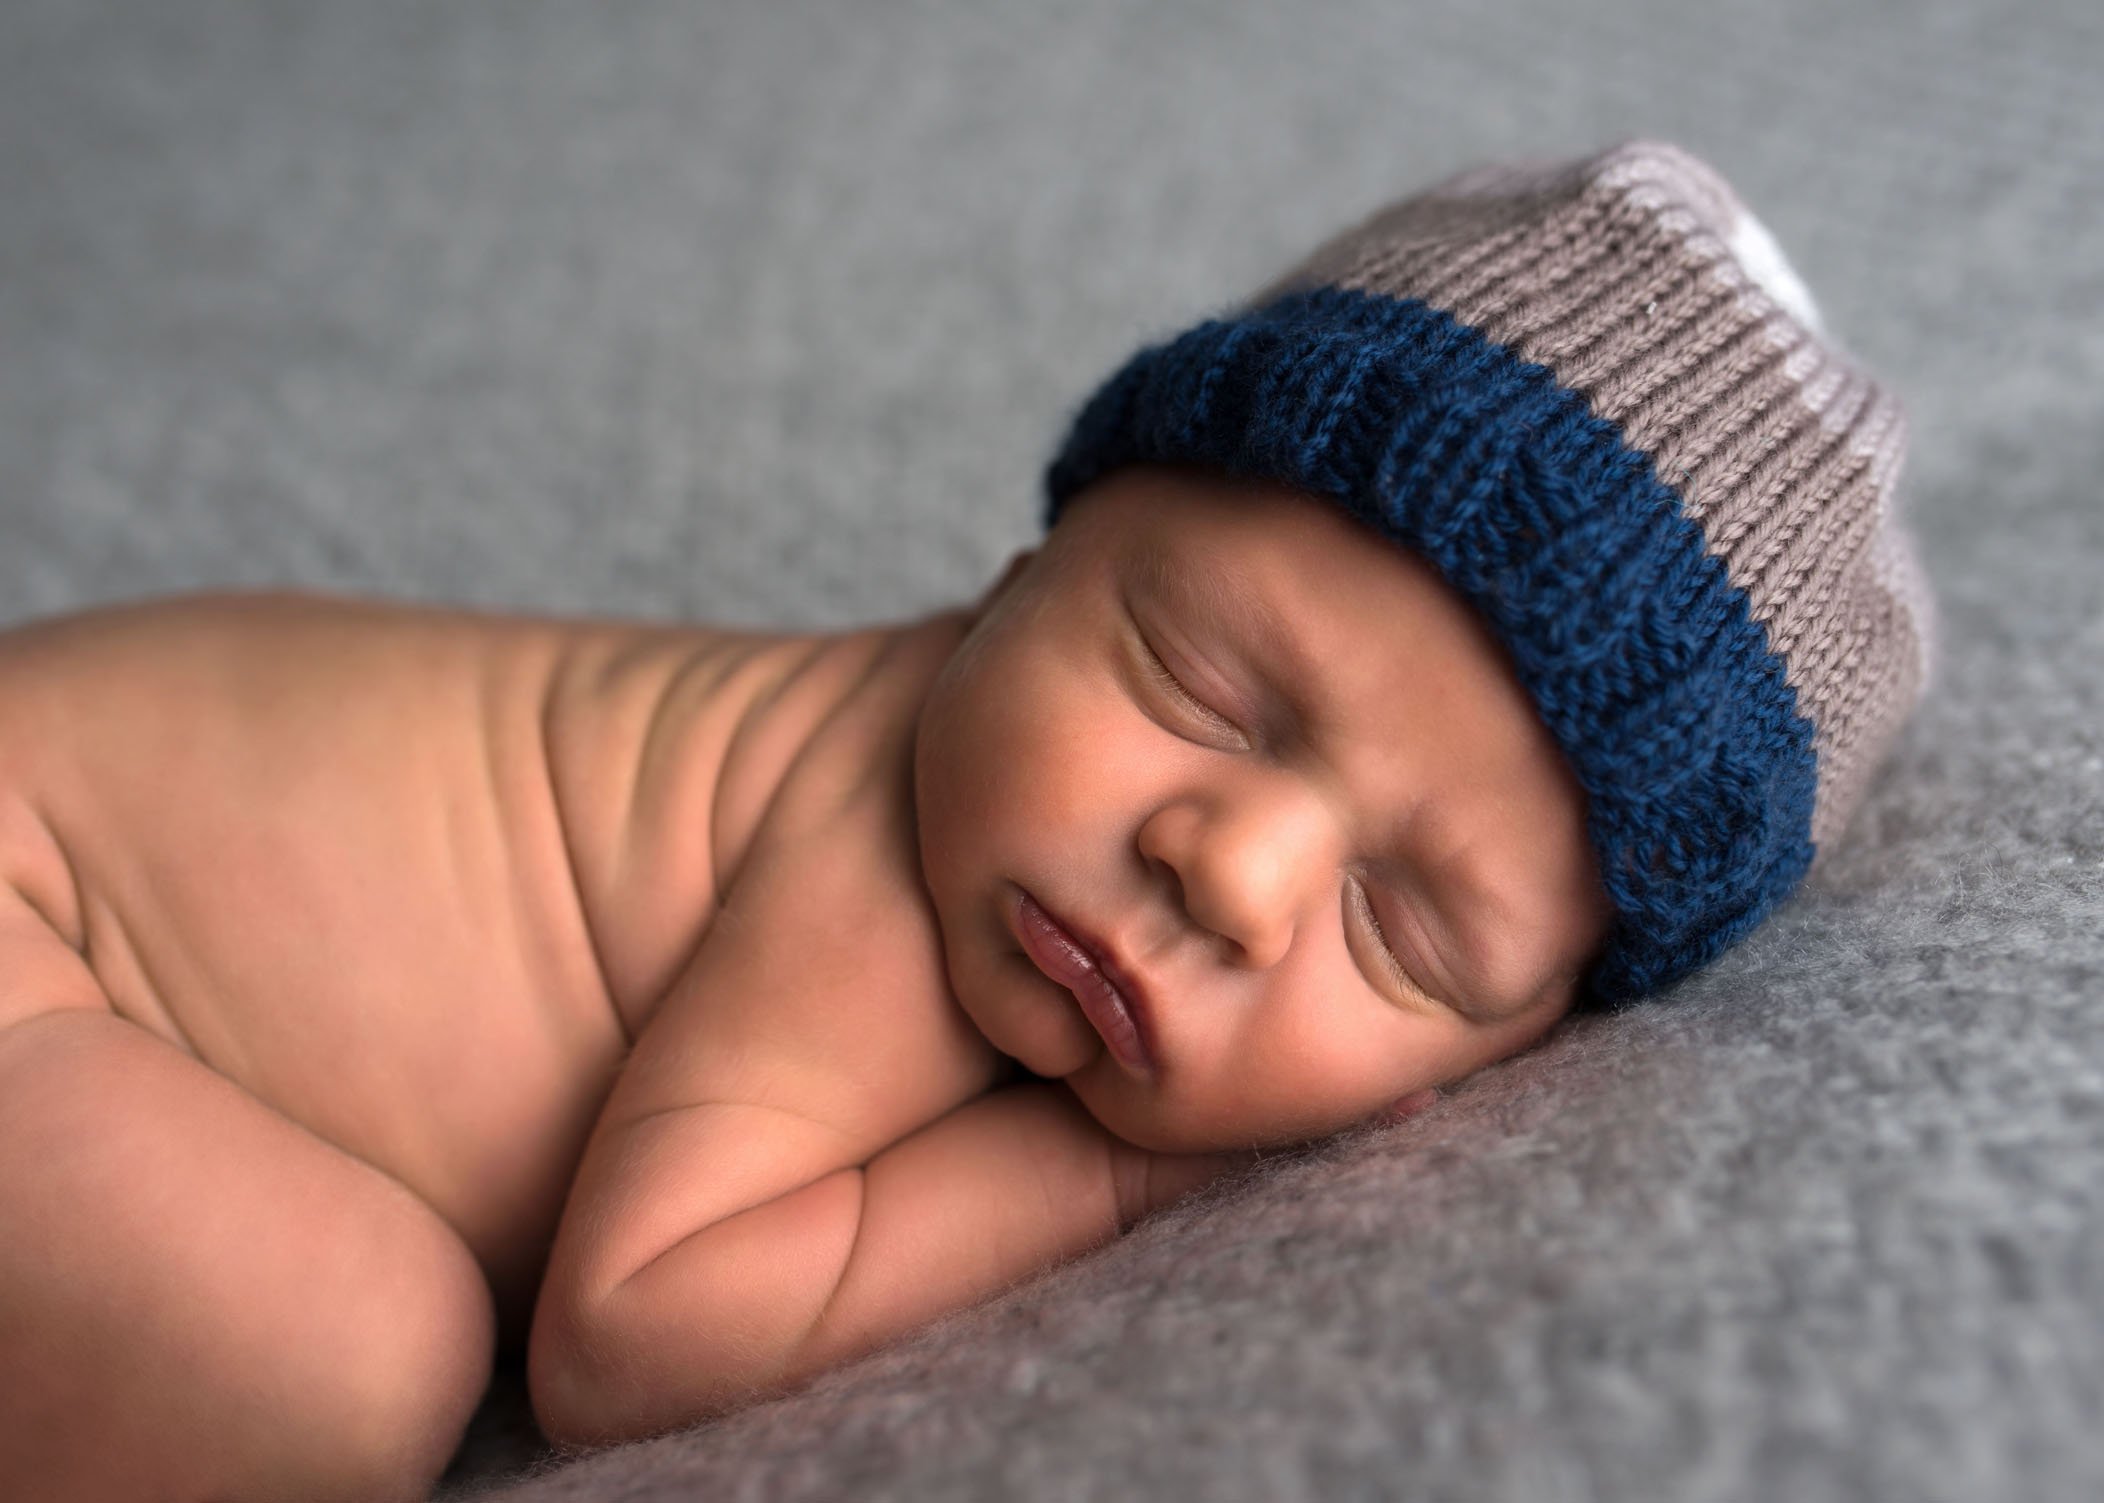 newborn baby sleeping with hat on and a grumpy face One Big Happy Photo